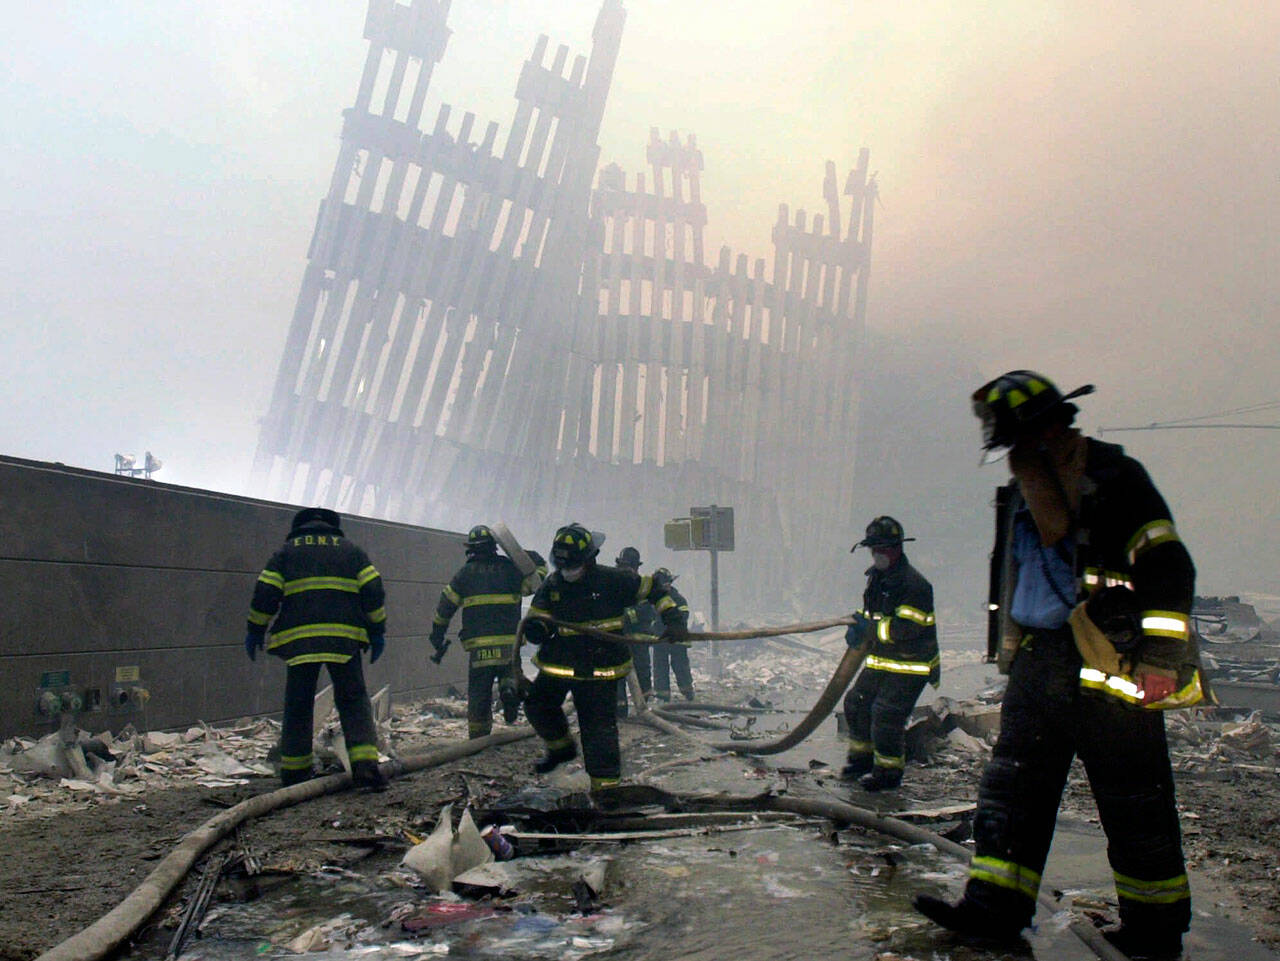 Firefighters work beneath the destroyed mullions, the vertical struts, of the World Trade Center in New York on Tuesday, Sept. 11, 2001. (Mark Lennihan / Associated Press file photo)